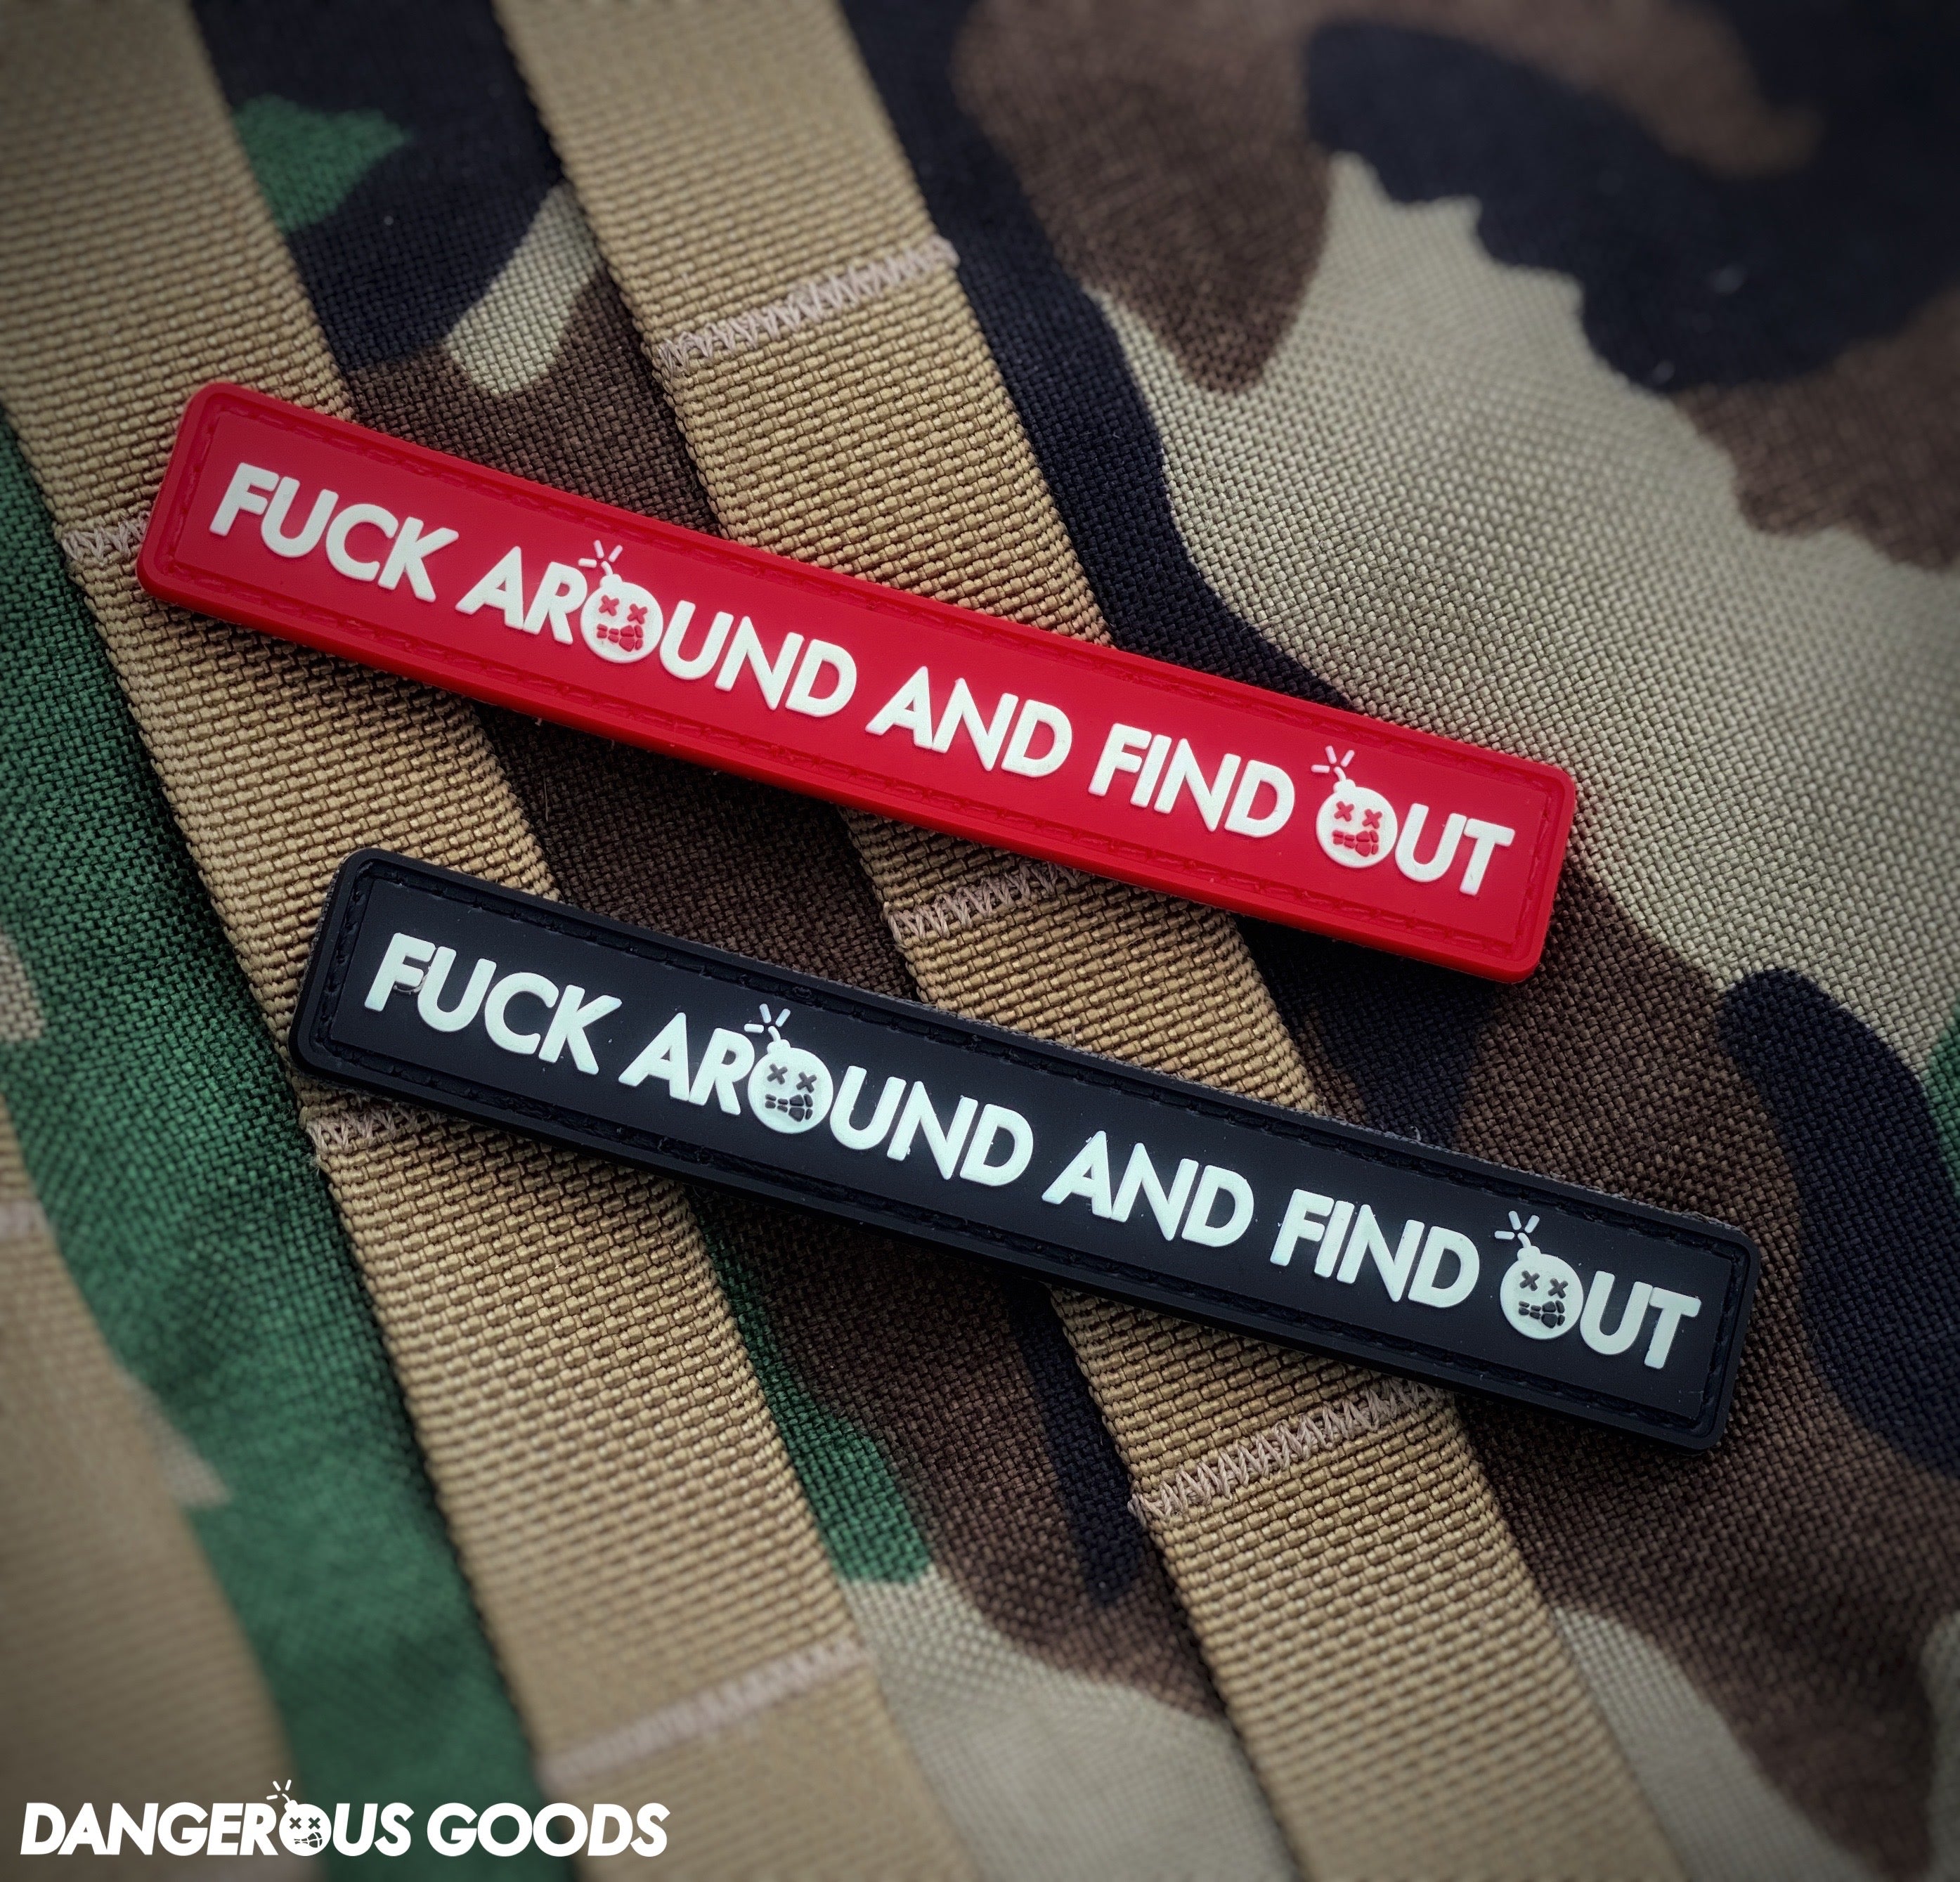 Dangerous Goods® “Fuck Around and Find Out” PVC Morale Patch - 2 Colors